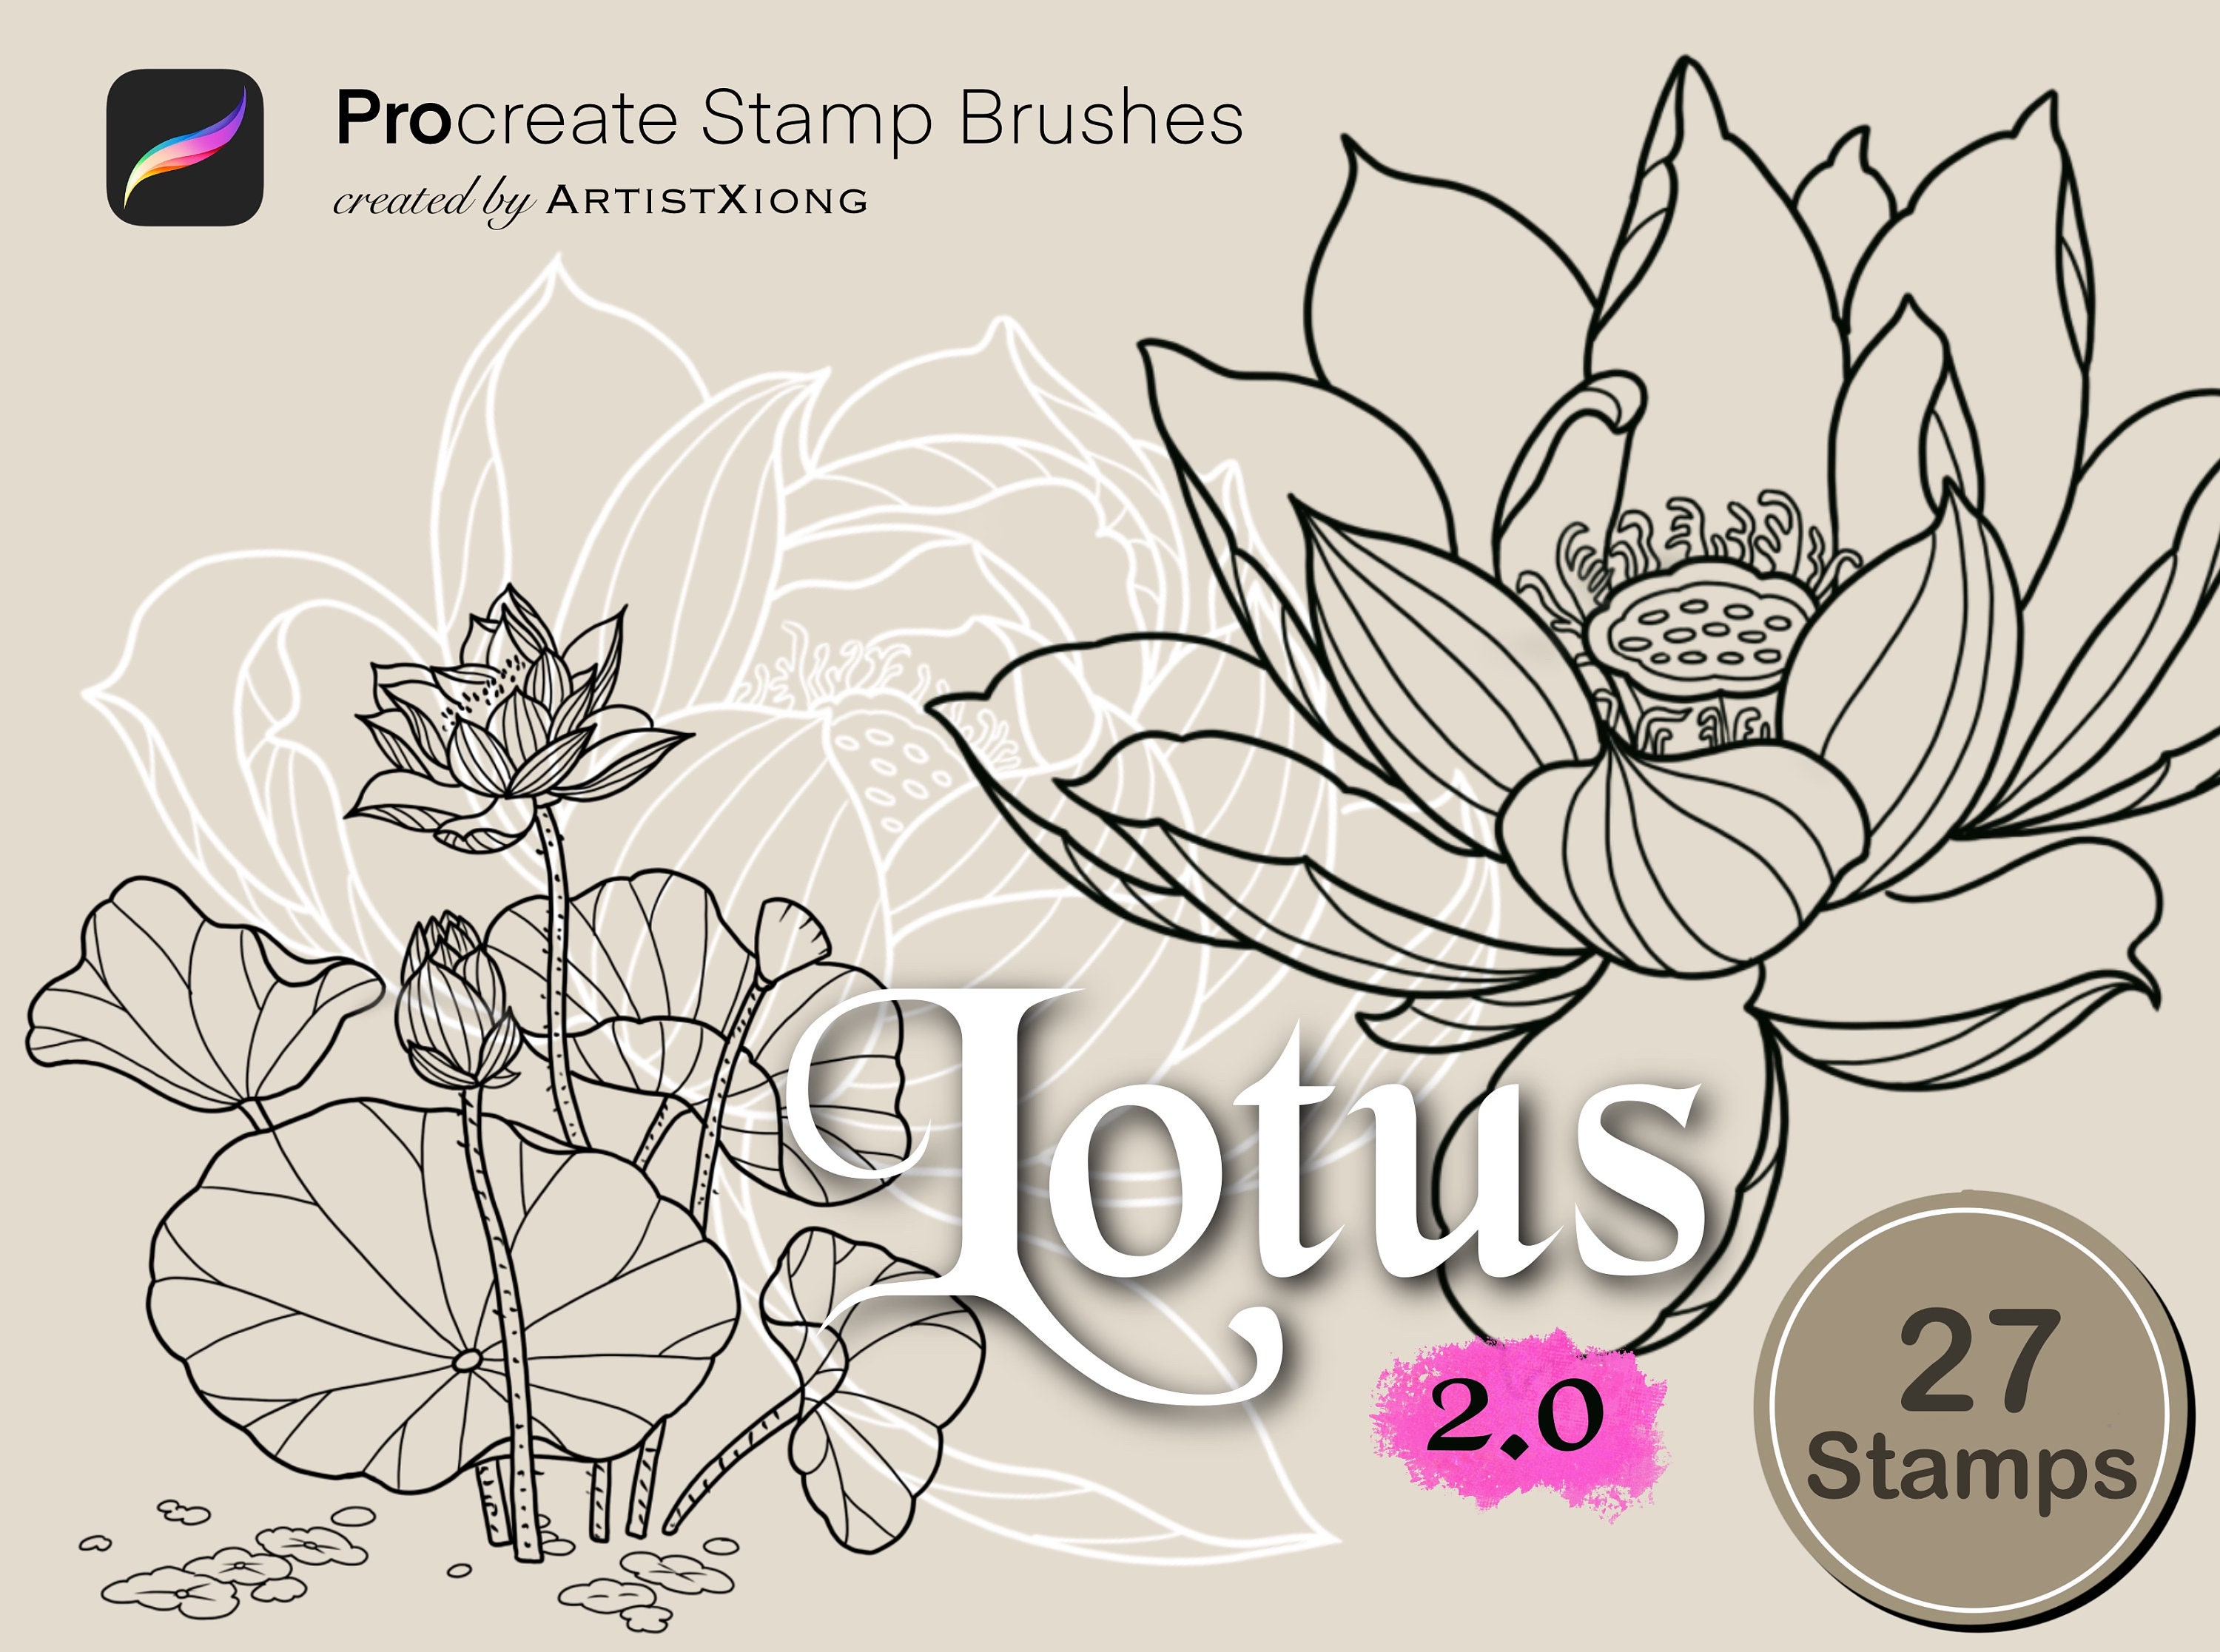 SAVE 30% for 3 ITEMS 12 Procreate Stamps Lotus Procreate 